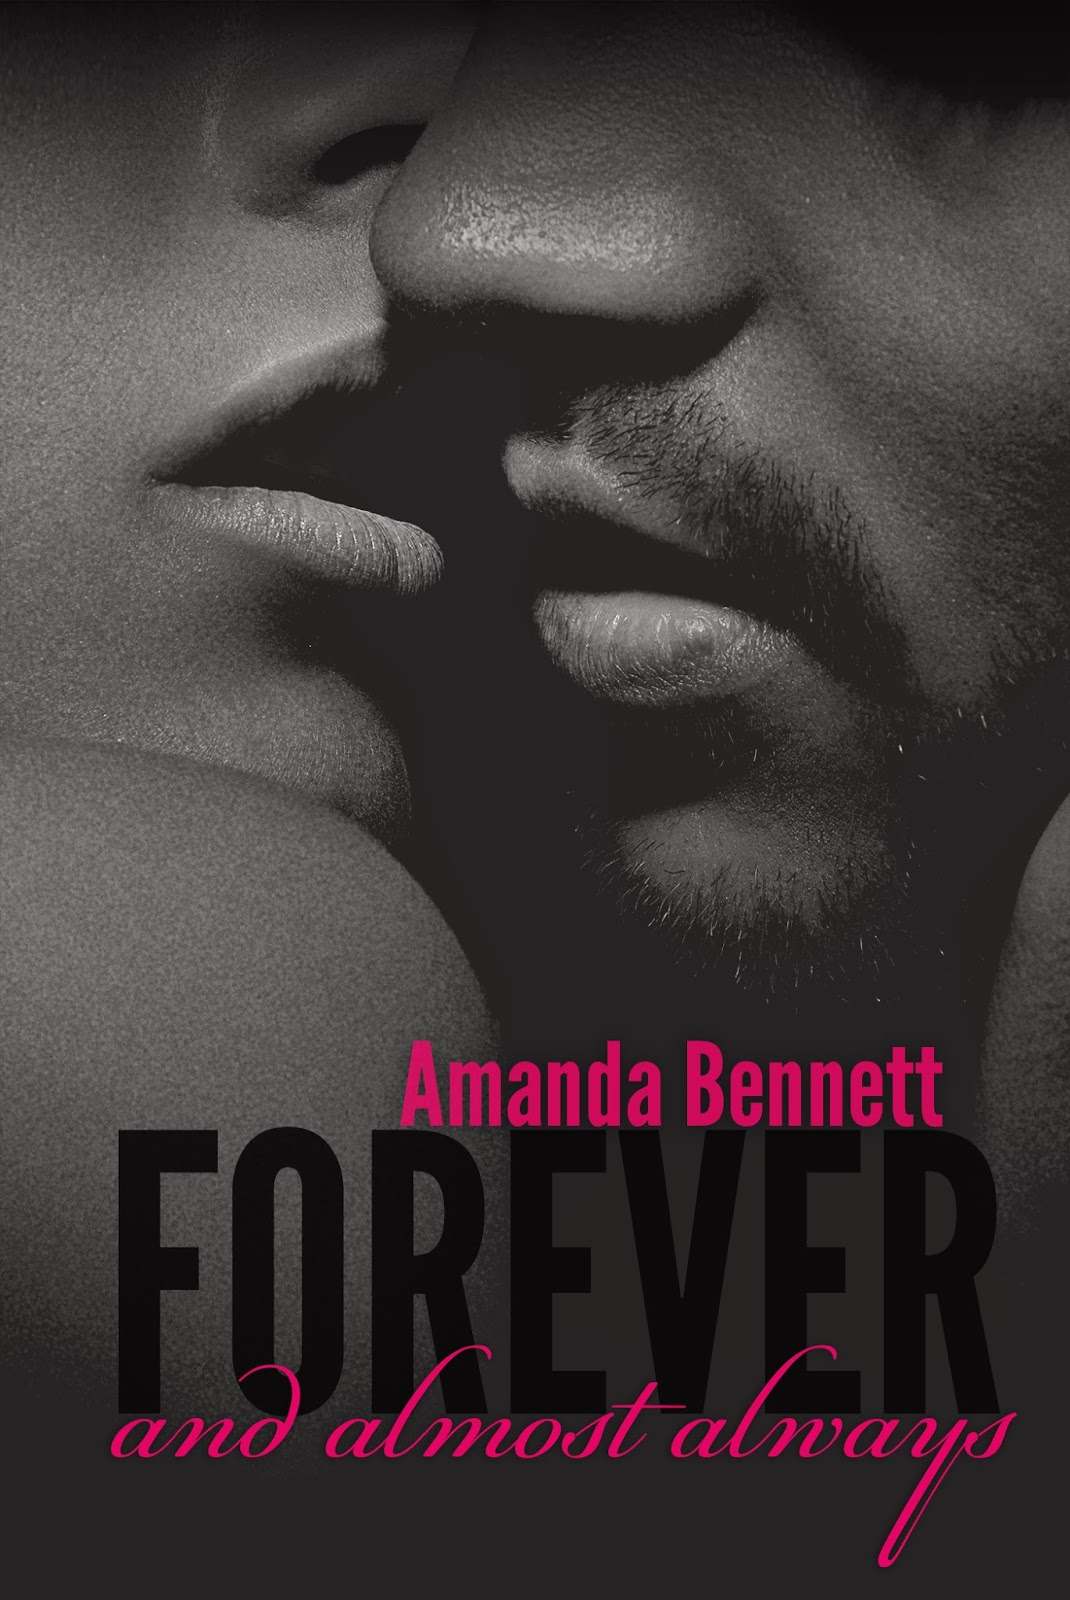 Bennet Sings for lovers. Almost always. Romance fiction